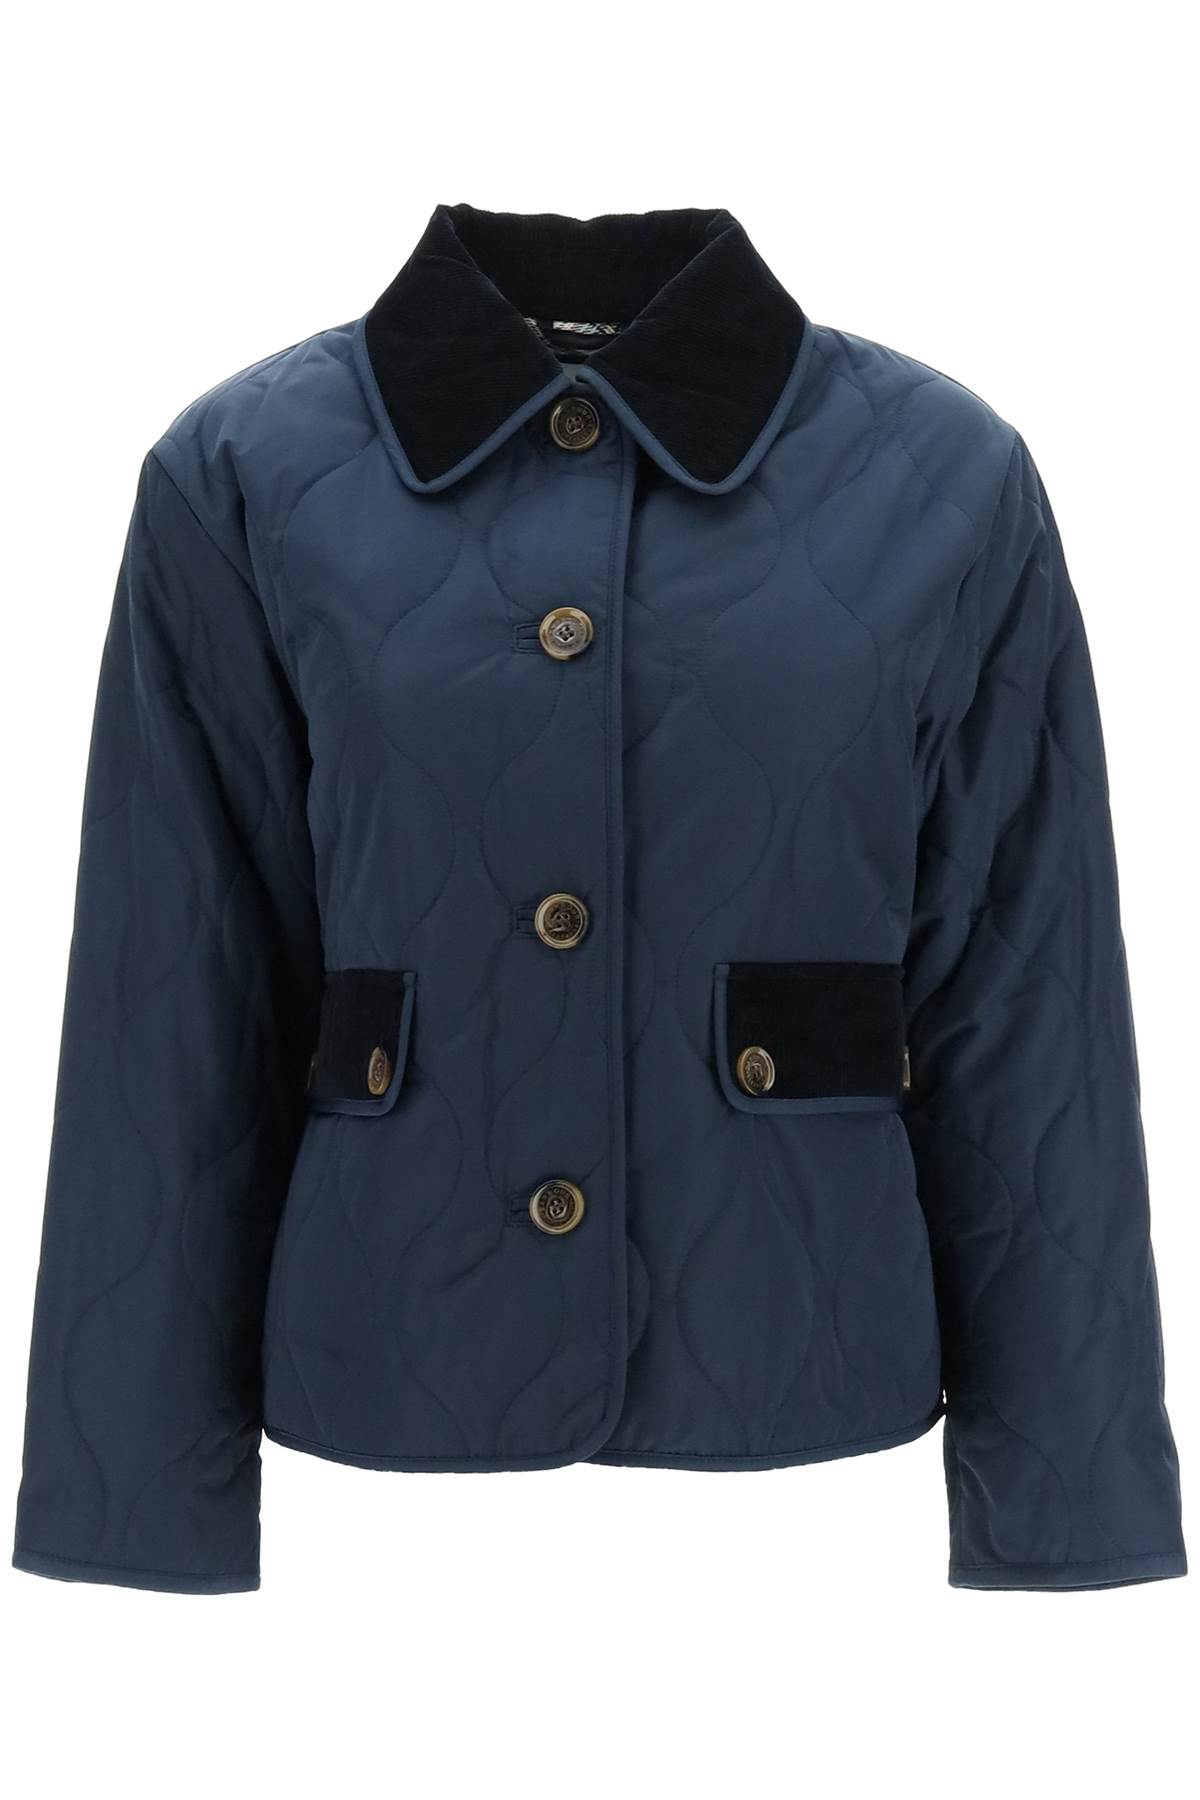 Barbour blair Quilted Jacket